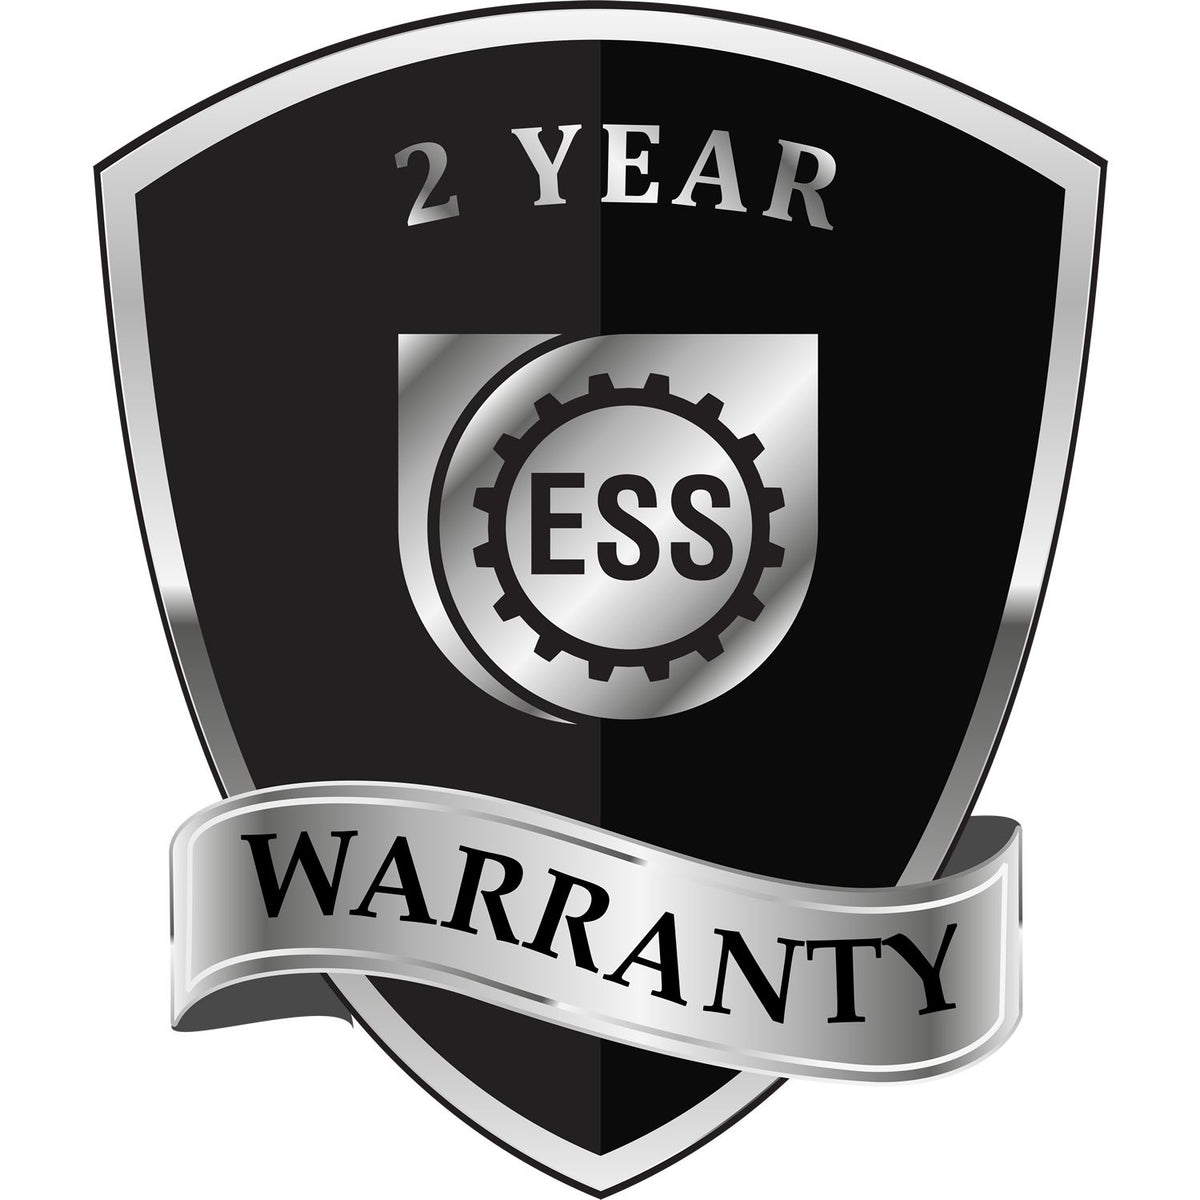 A black and silver badge or emblem showing warranty information for the State of Illinois Extended Long Reach Geologist Seal